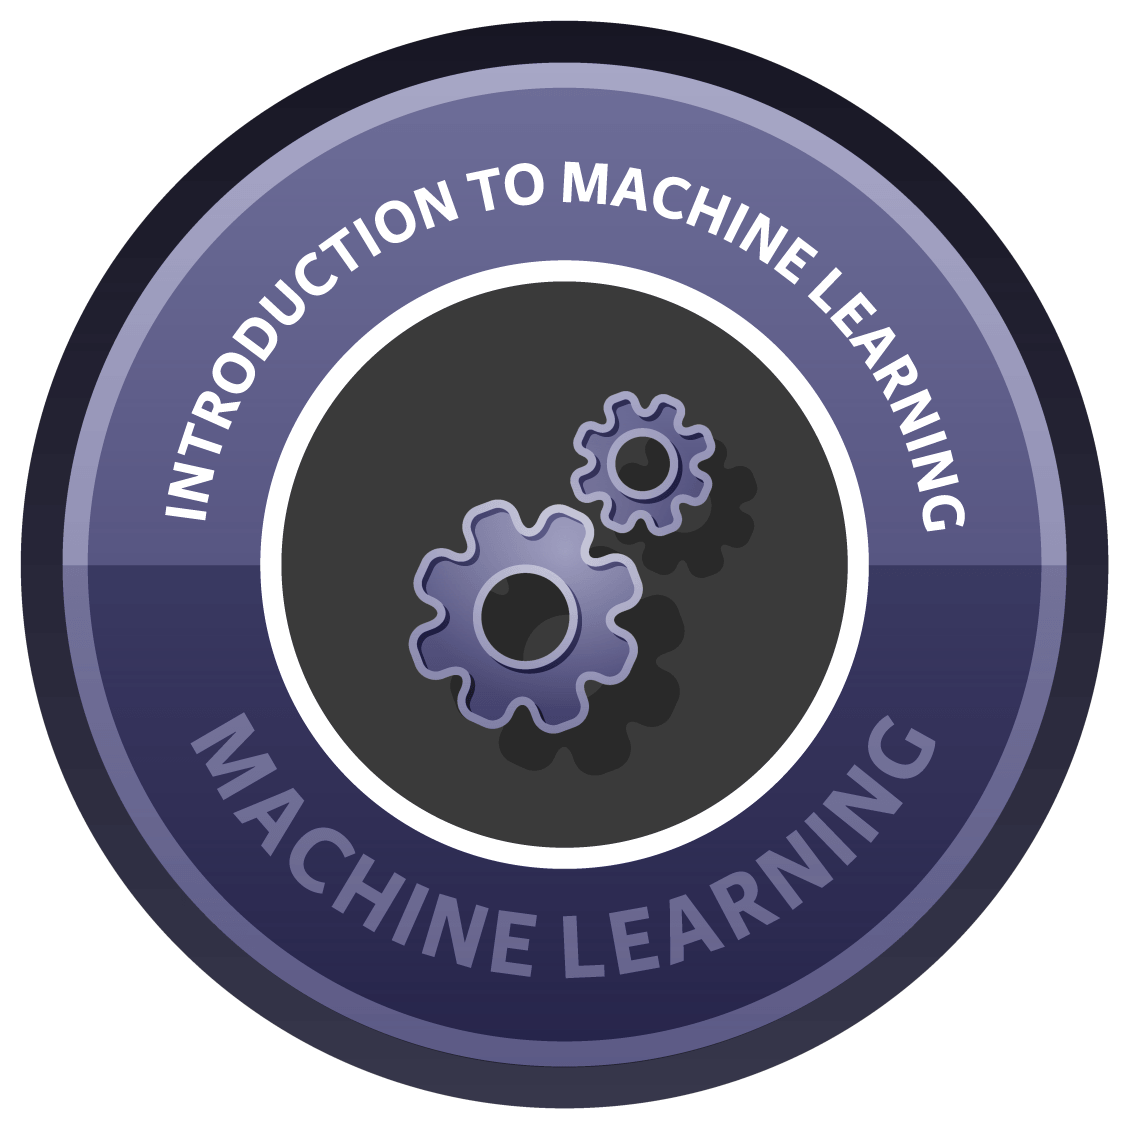 Introduction to Machine Learning - Online Course